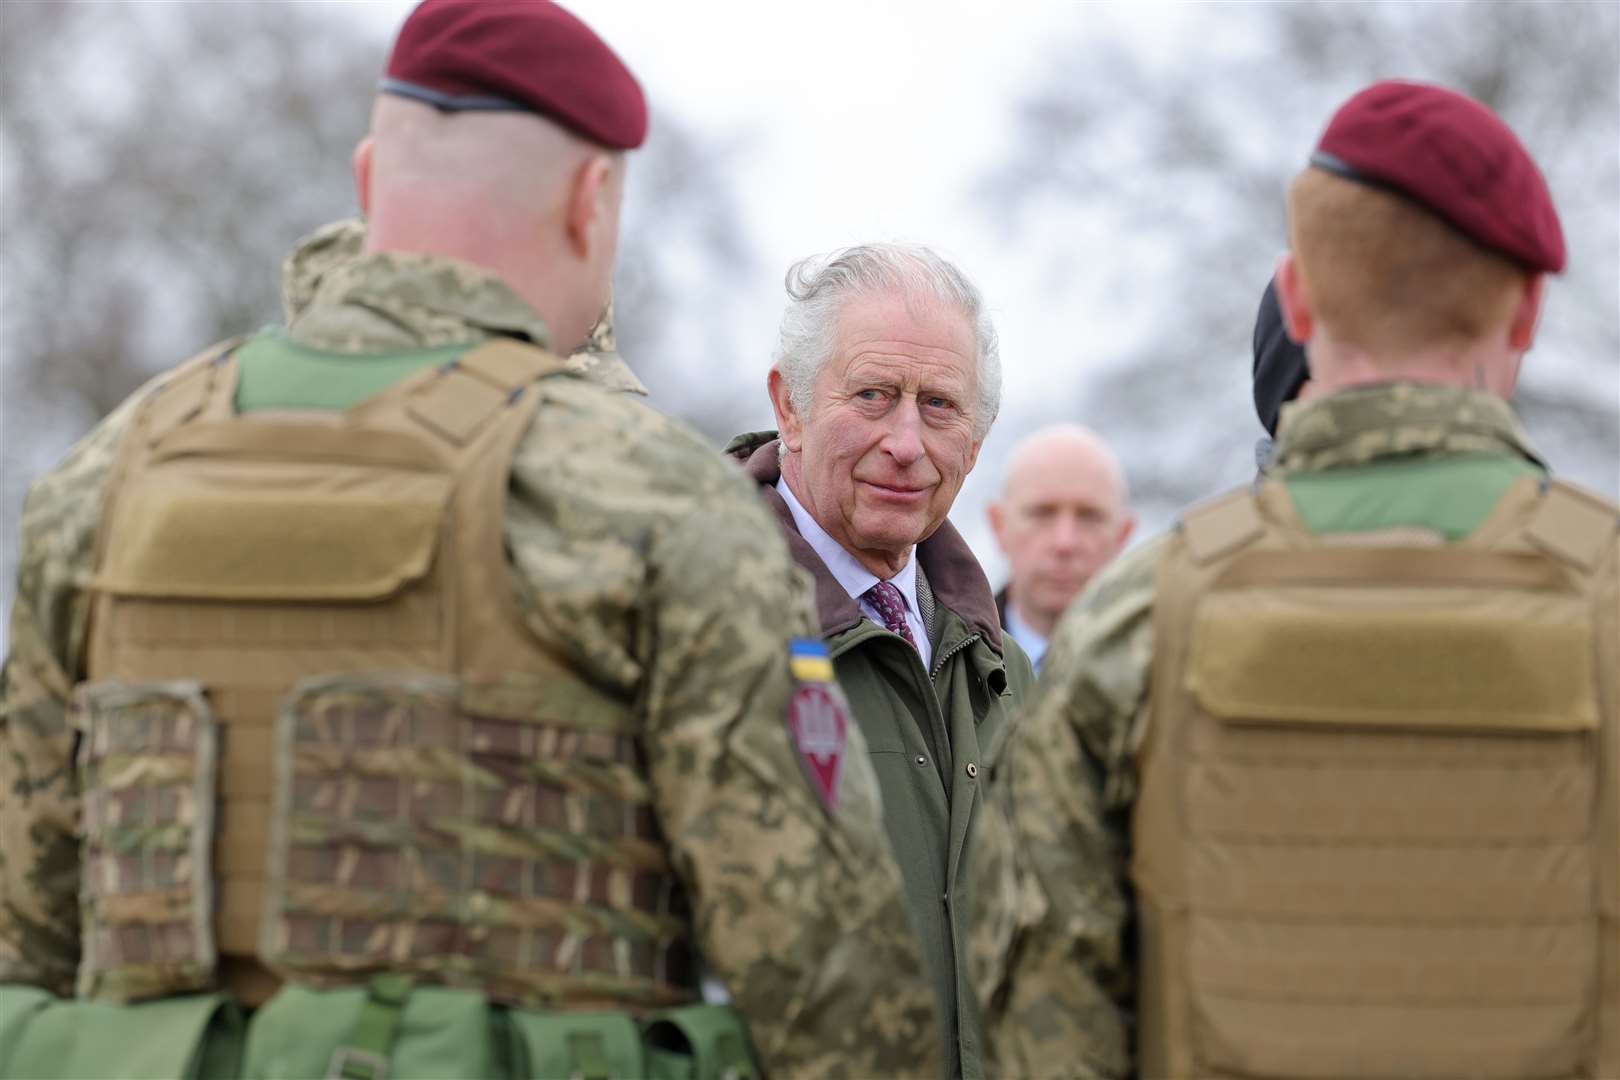 Charles met Ukrainian recruits earlier this week undergoing training at a military base in Wiltshire (Chris Jackson/PA)